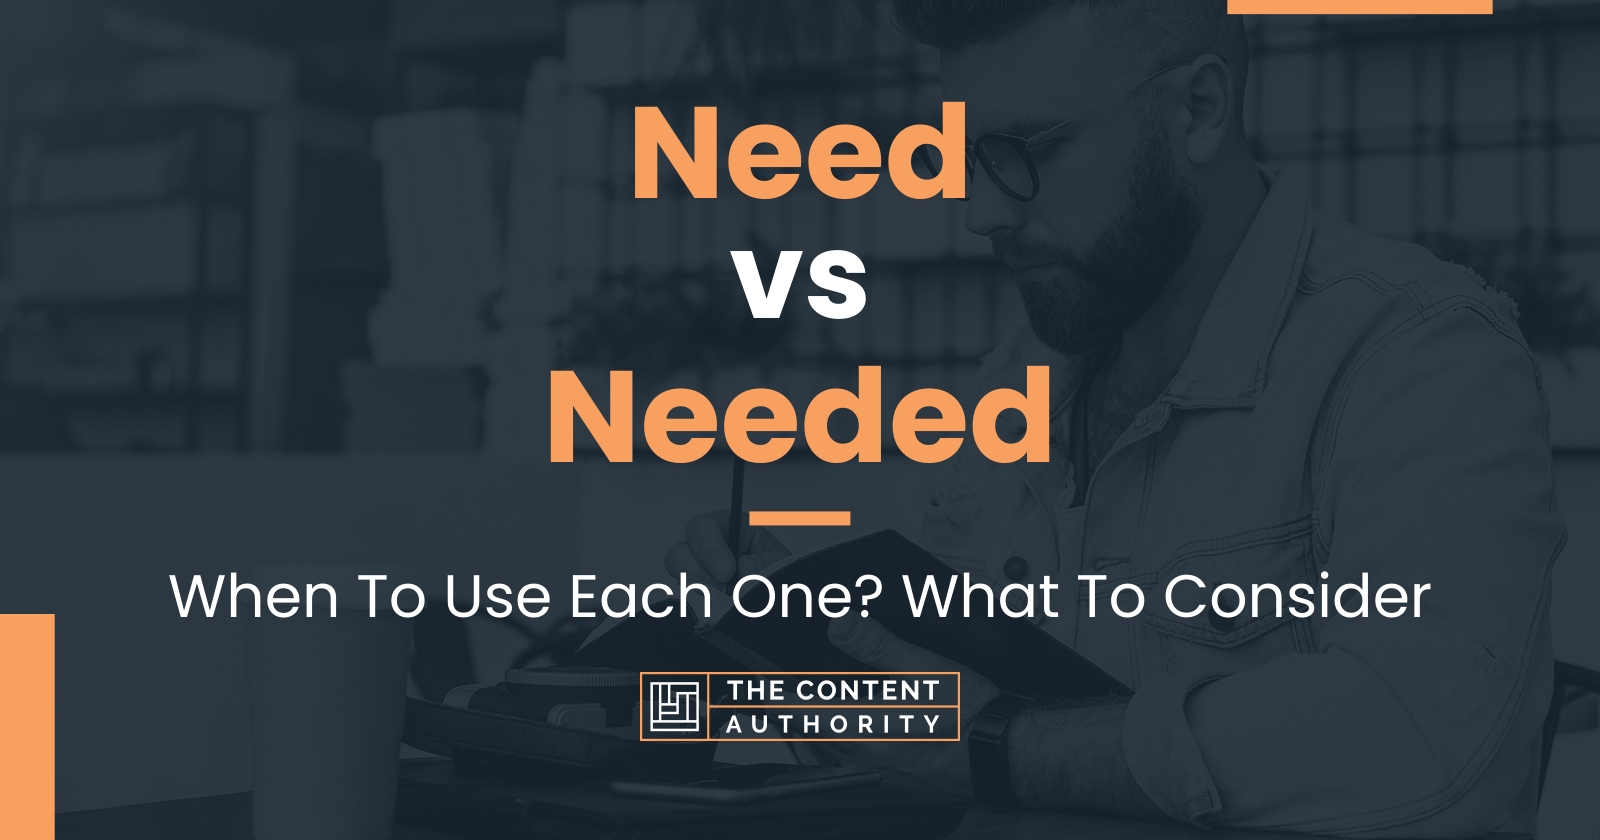 Need vs Needed: When To Use Each One? What To Consider